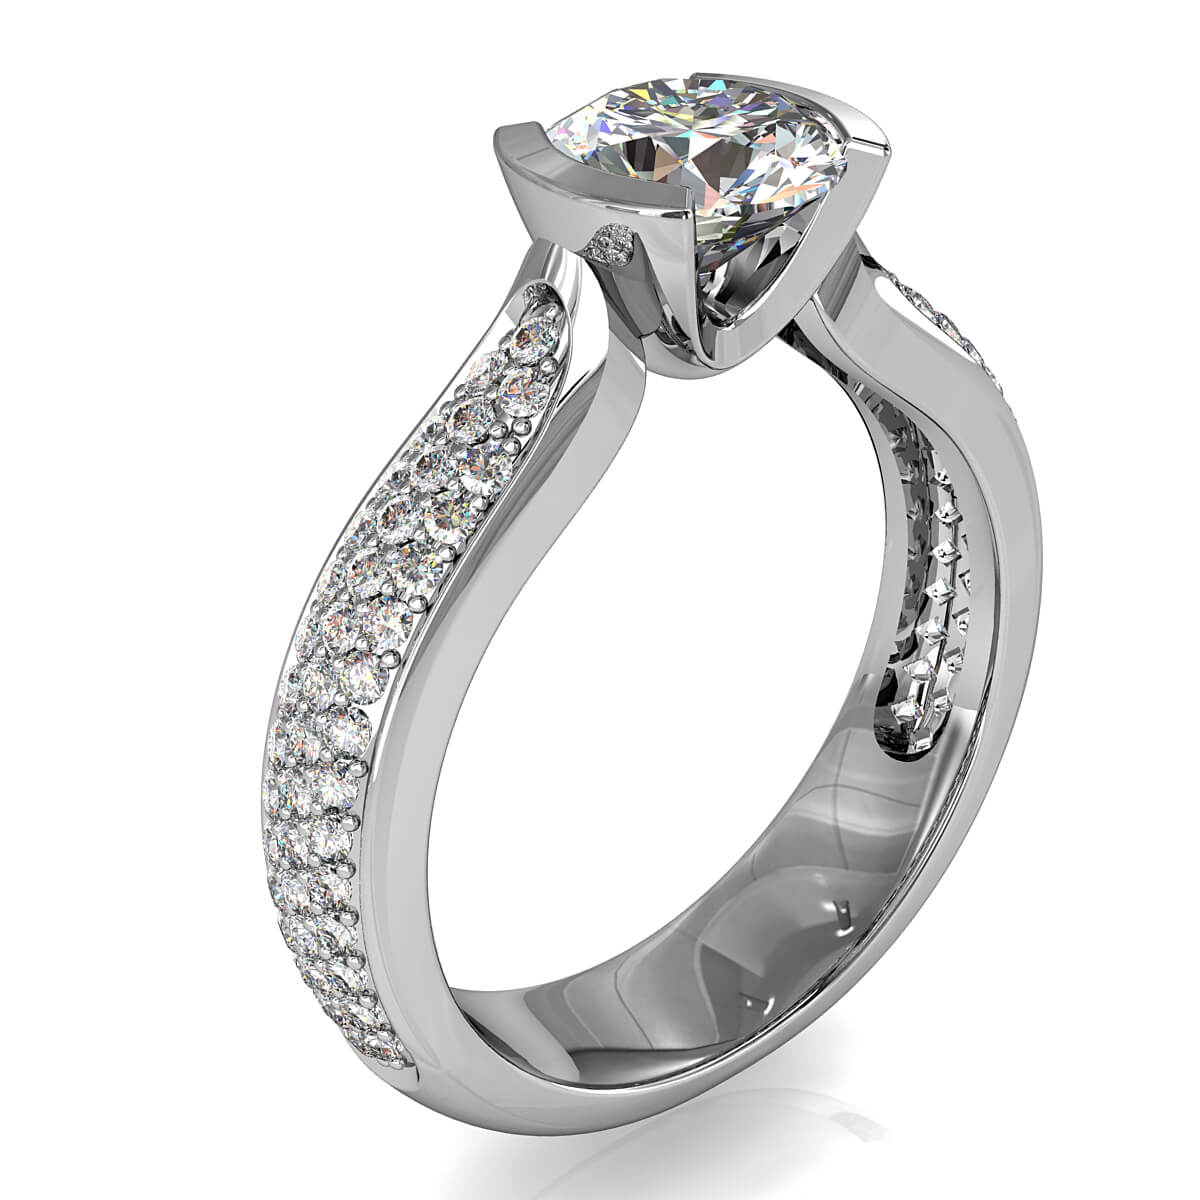 Round Brilliant Cut Diamond Solitaire Engagement Ring, Semi Bezel Tension Set on a Tapered Pave Band.